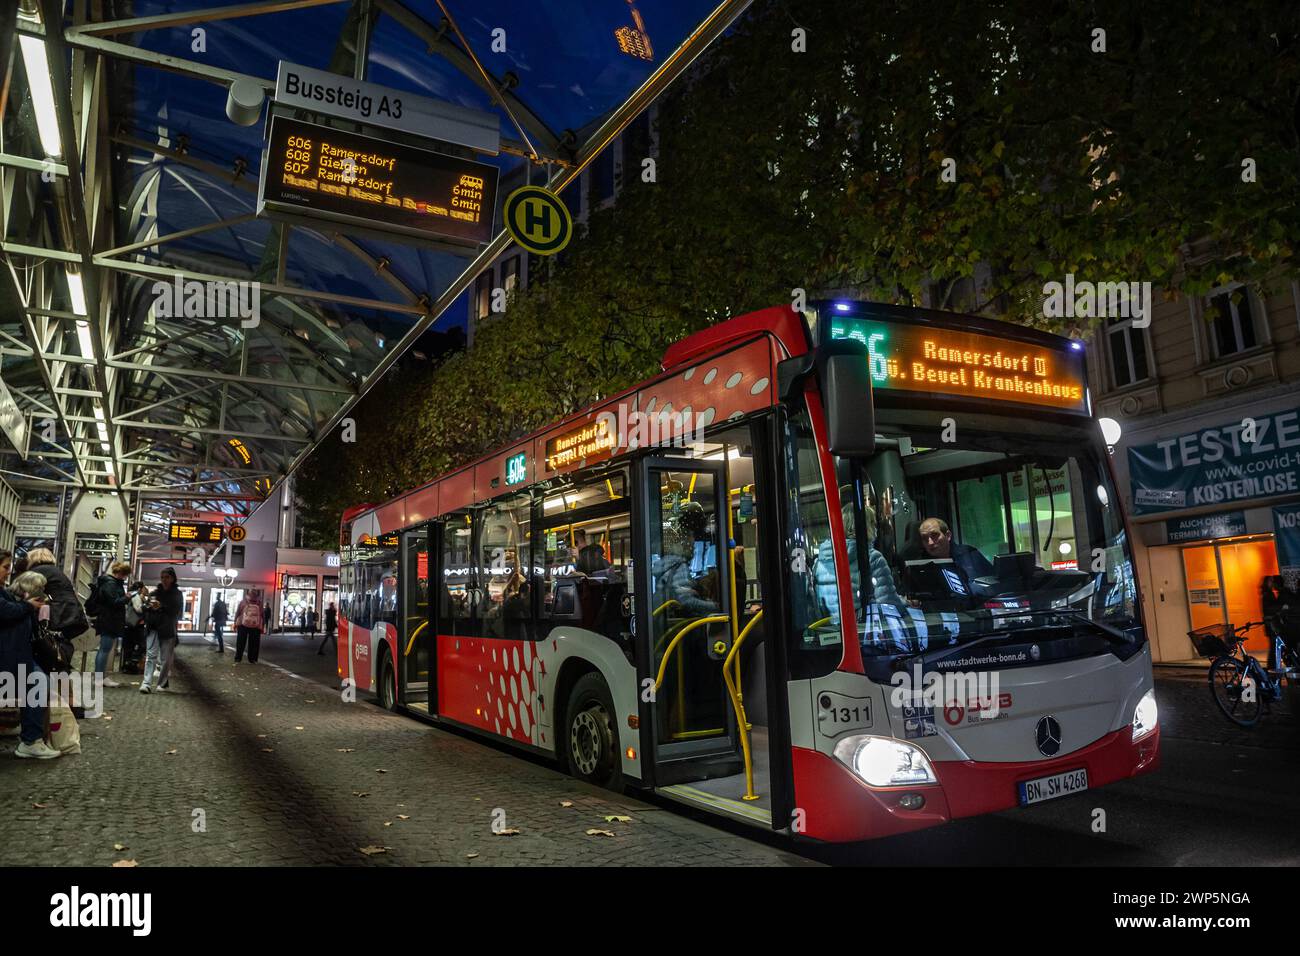 Picture of an SWB bus in Bonn, Germany. Stadtwerke Bonn (SWB) Bus und Bahn provides public transportation services in the city of Bonn, Germany. The o Stock Photo